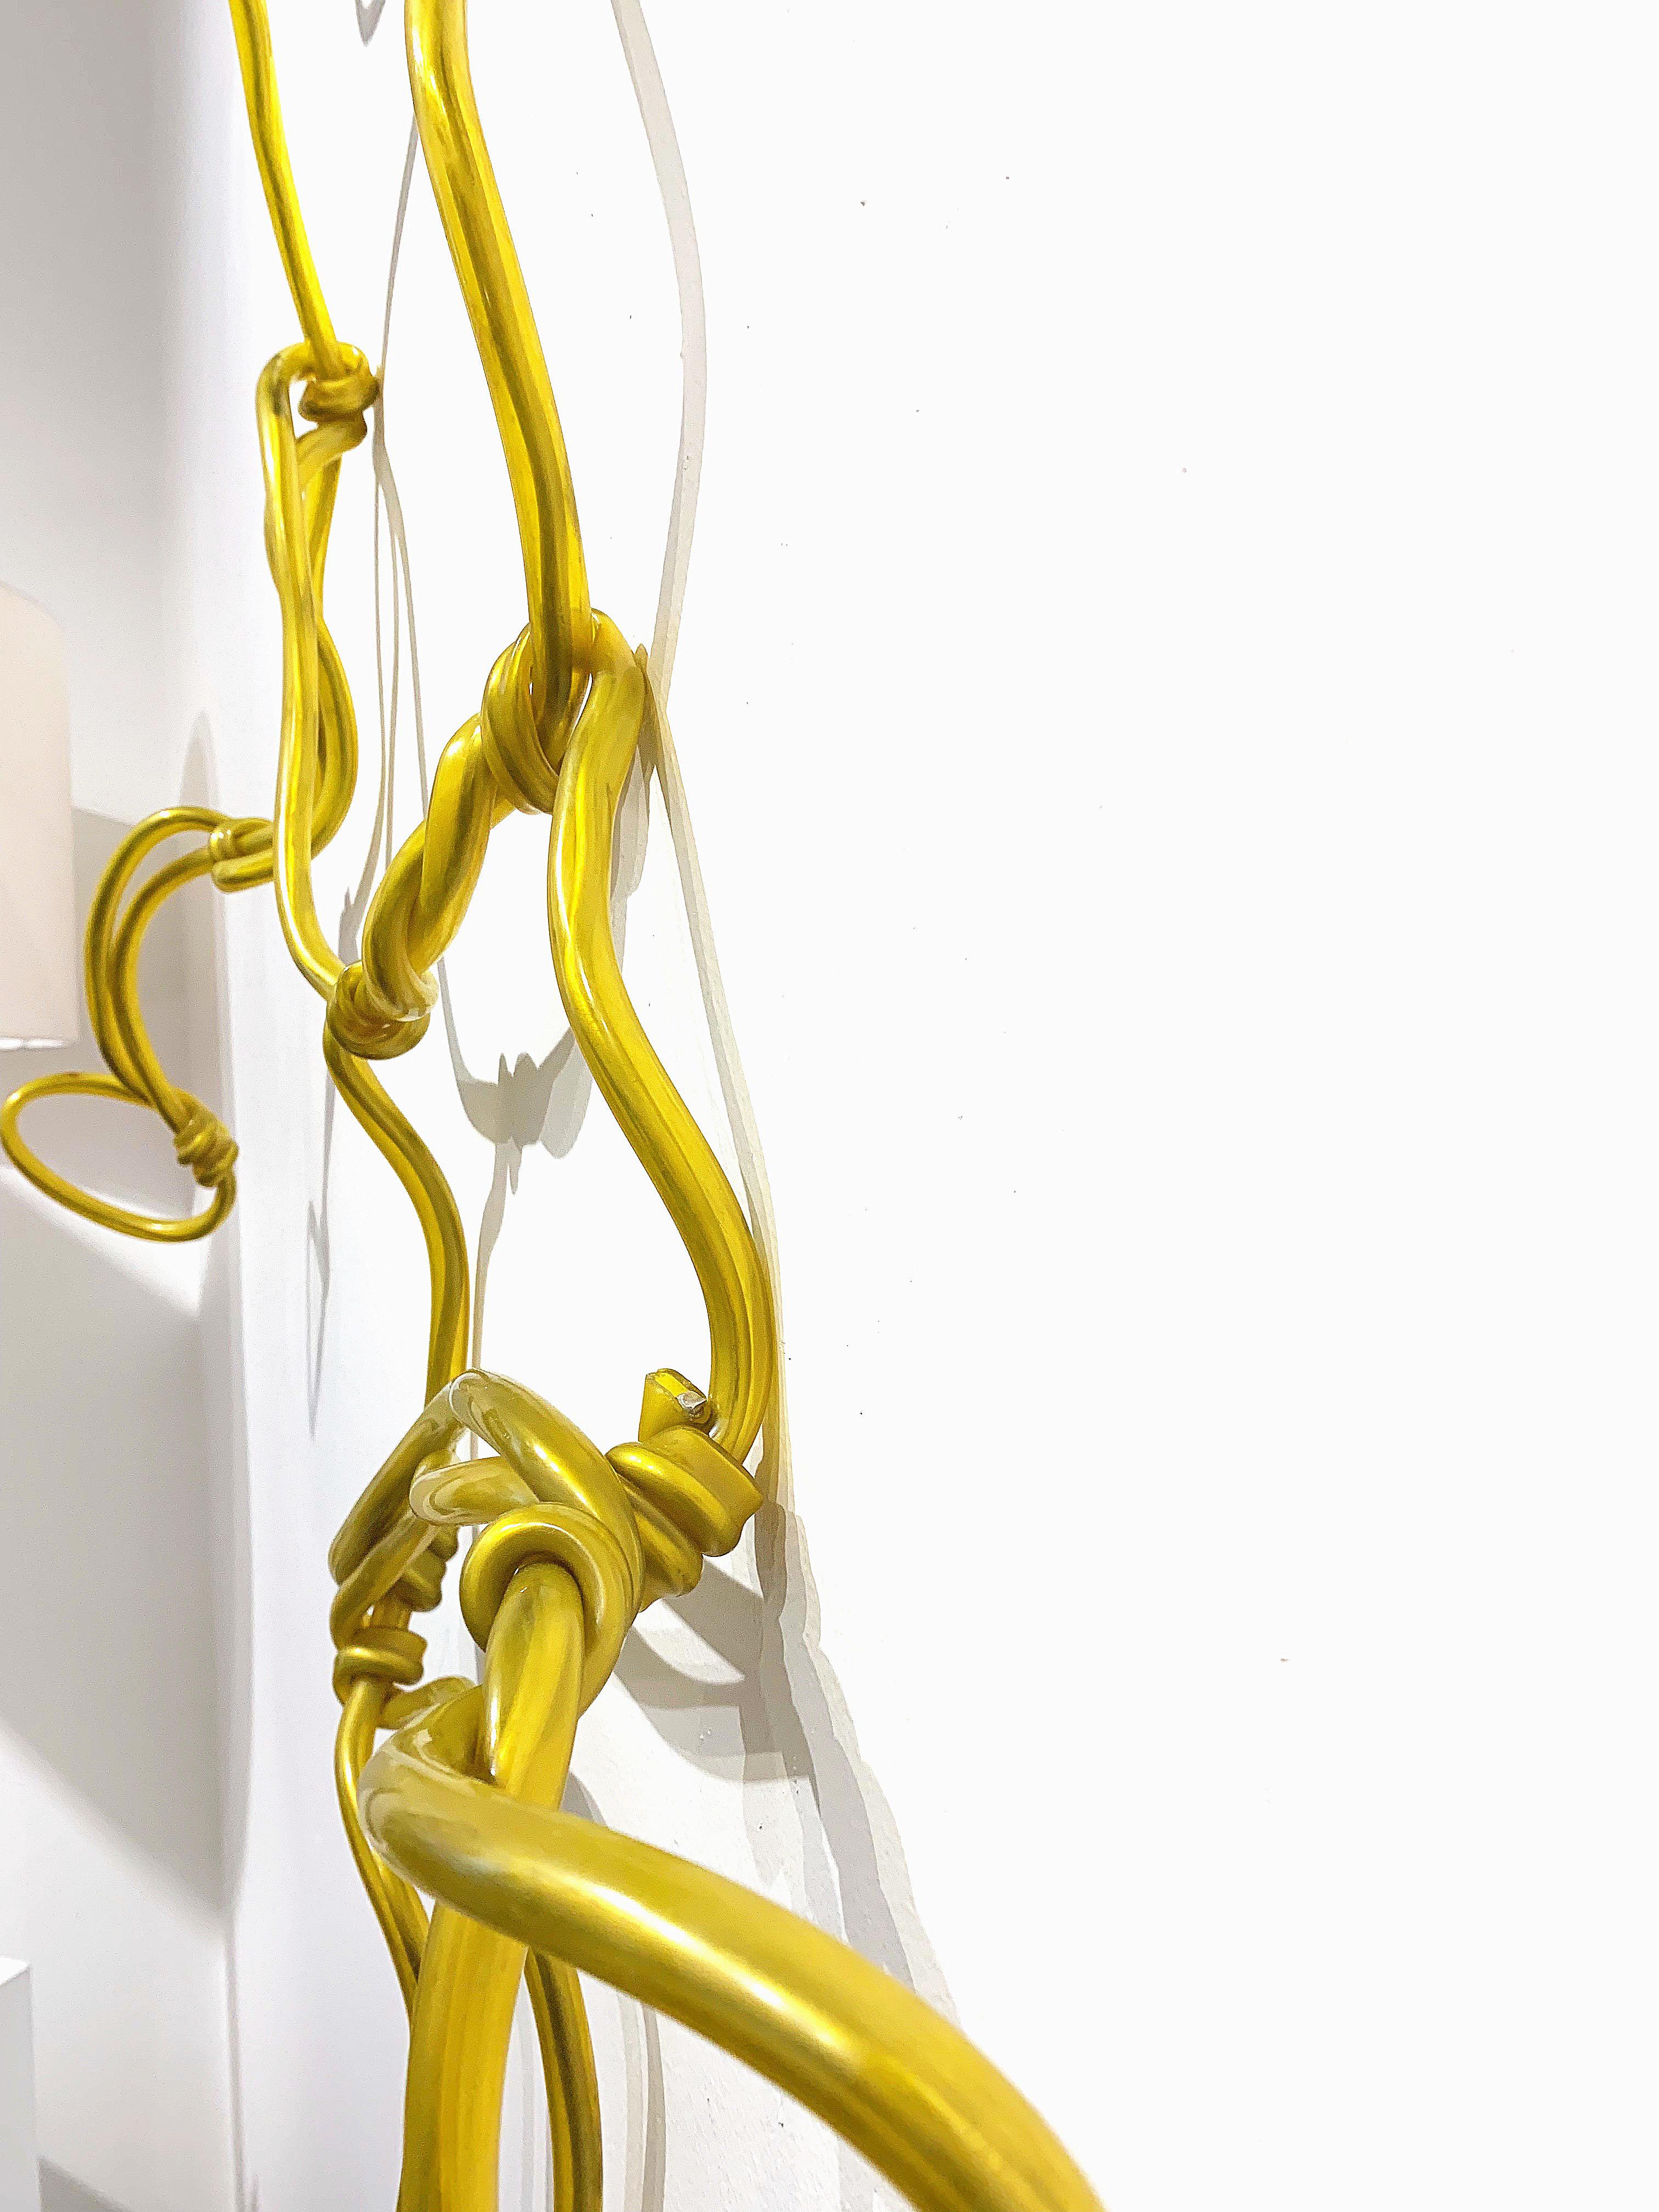 American Silhouette Aluminum and Yellow Plastic Tubing Sculpture For Sale